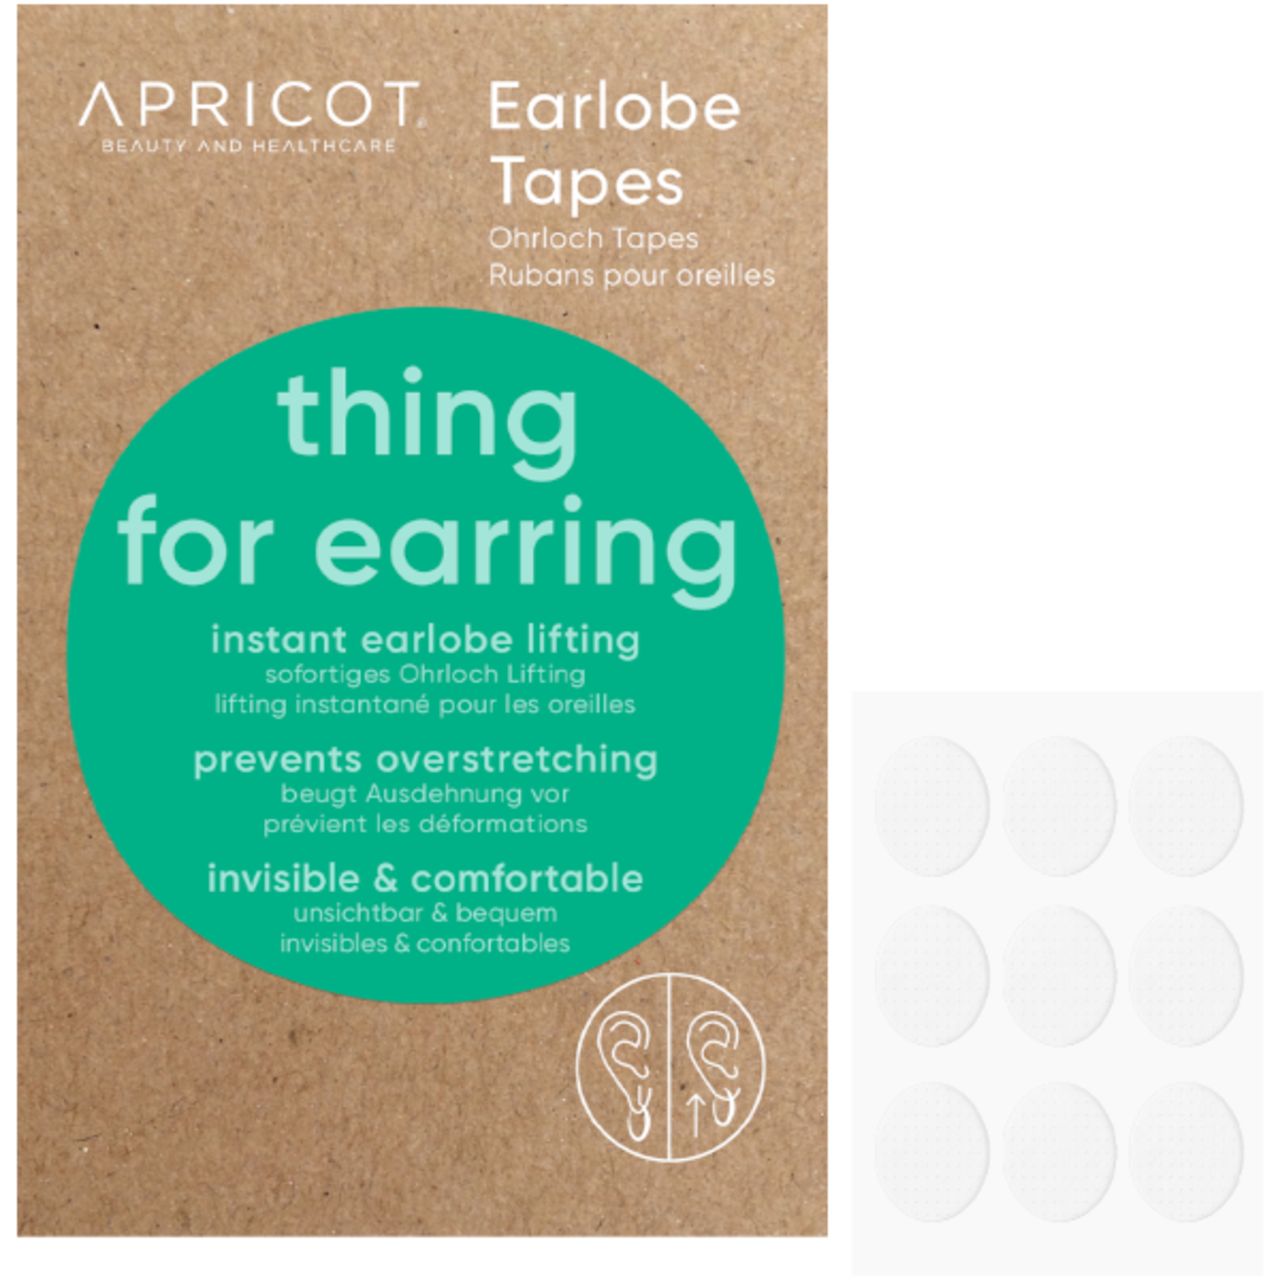 Apricot, Earlobe Tapes 'thing for earring'